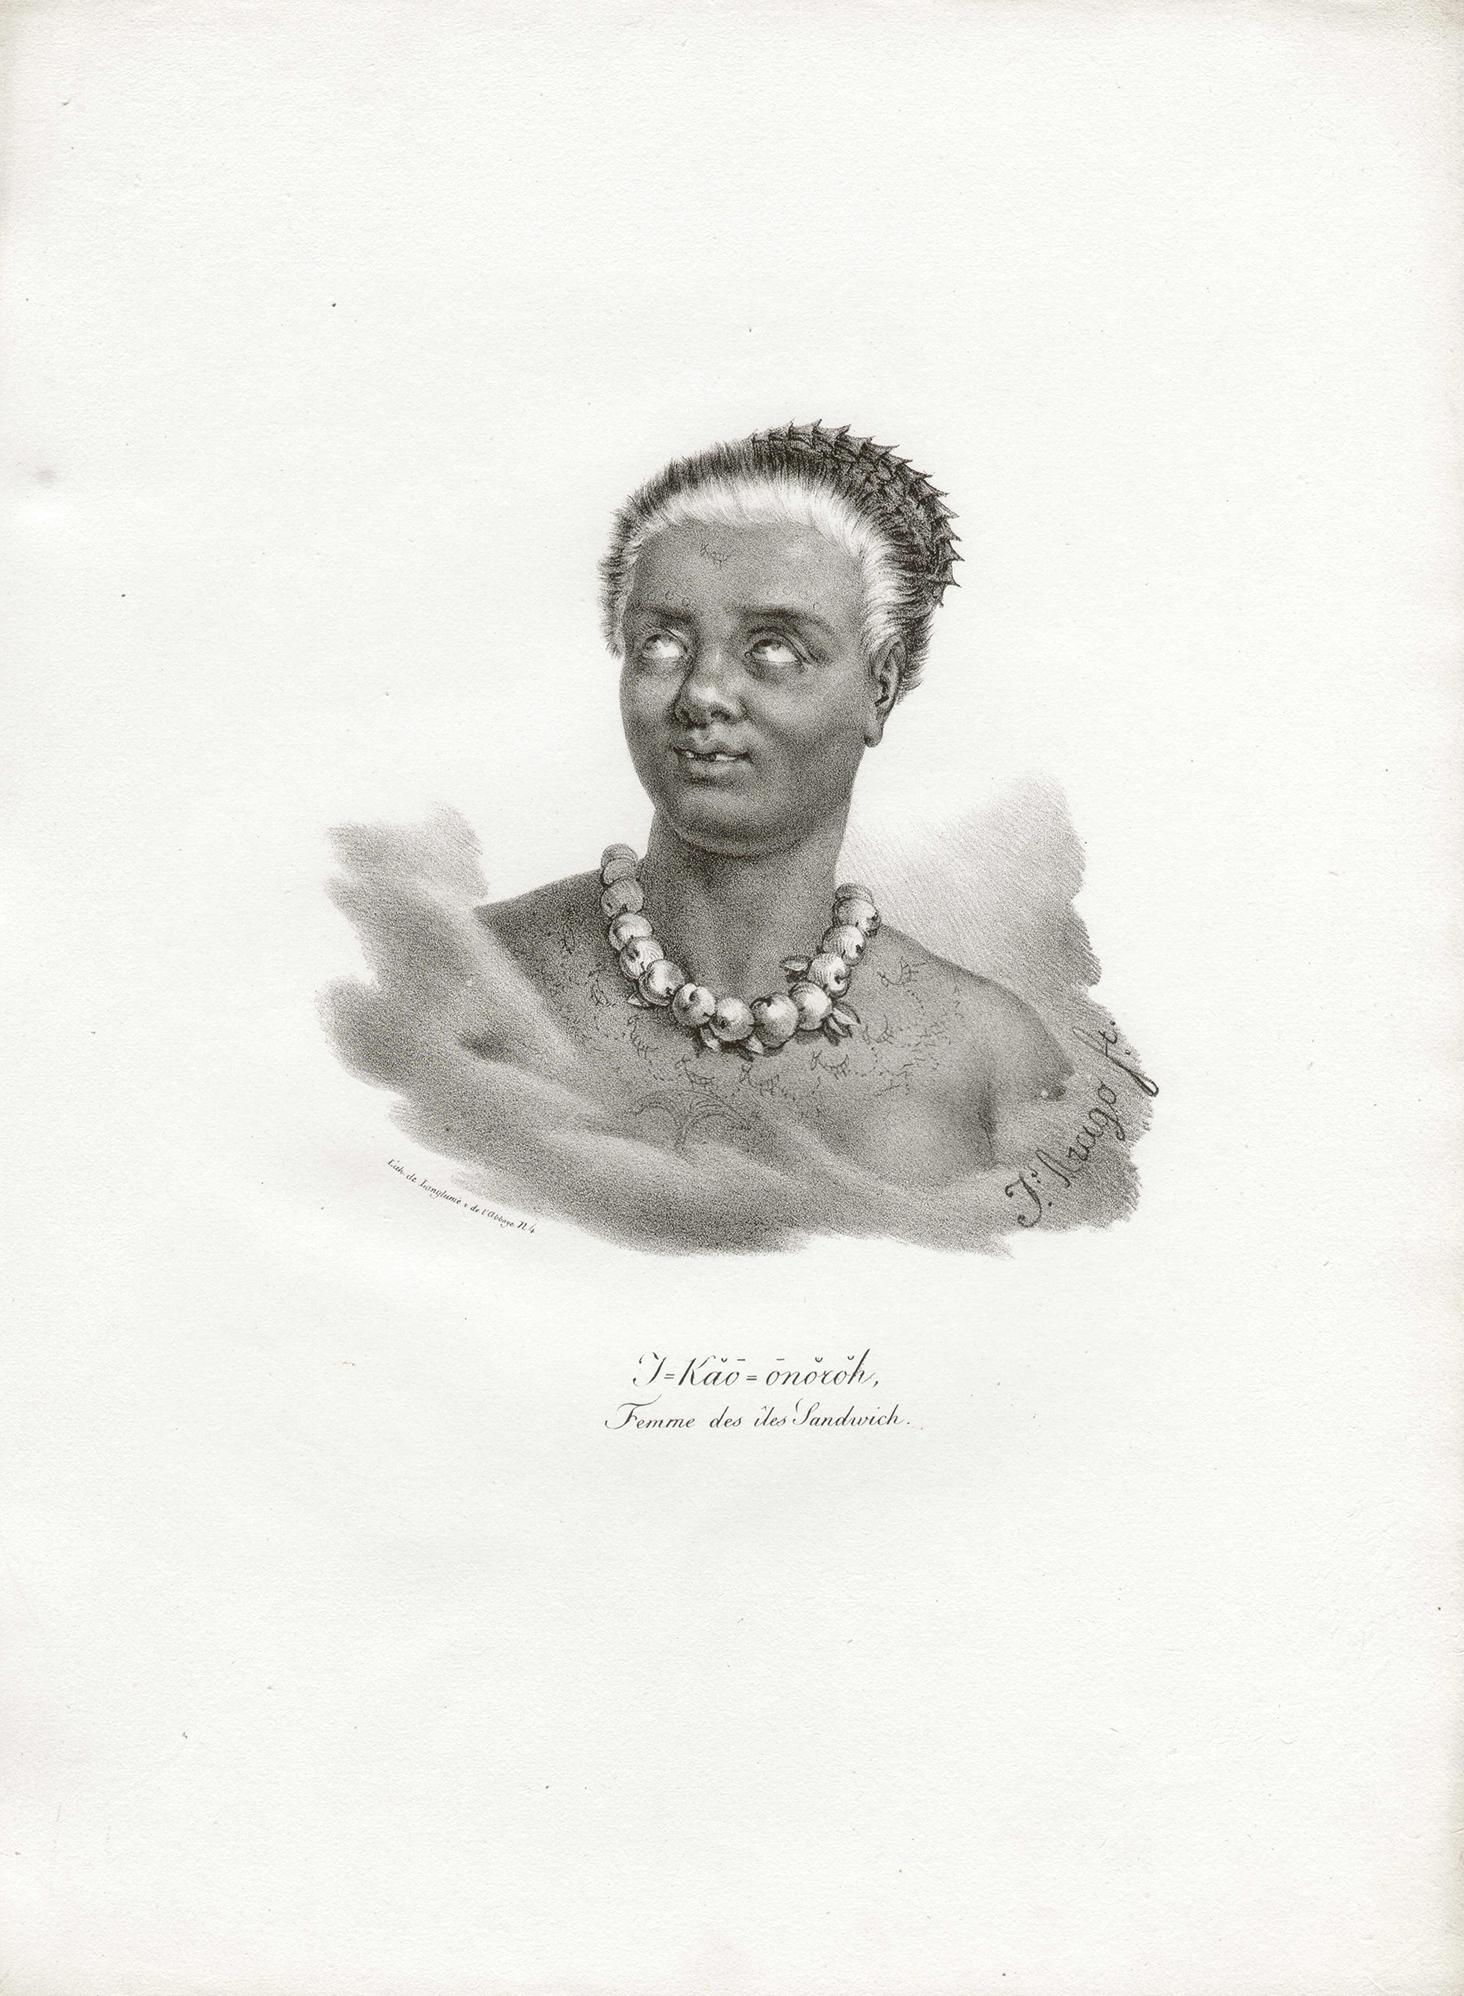 'T-Kaa-Onoroh, Femme des iles-Sandwich', Hawaii, antique lithograph print - Print by After Jacques Arago